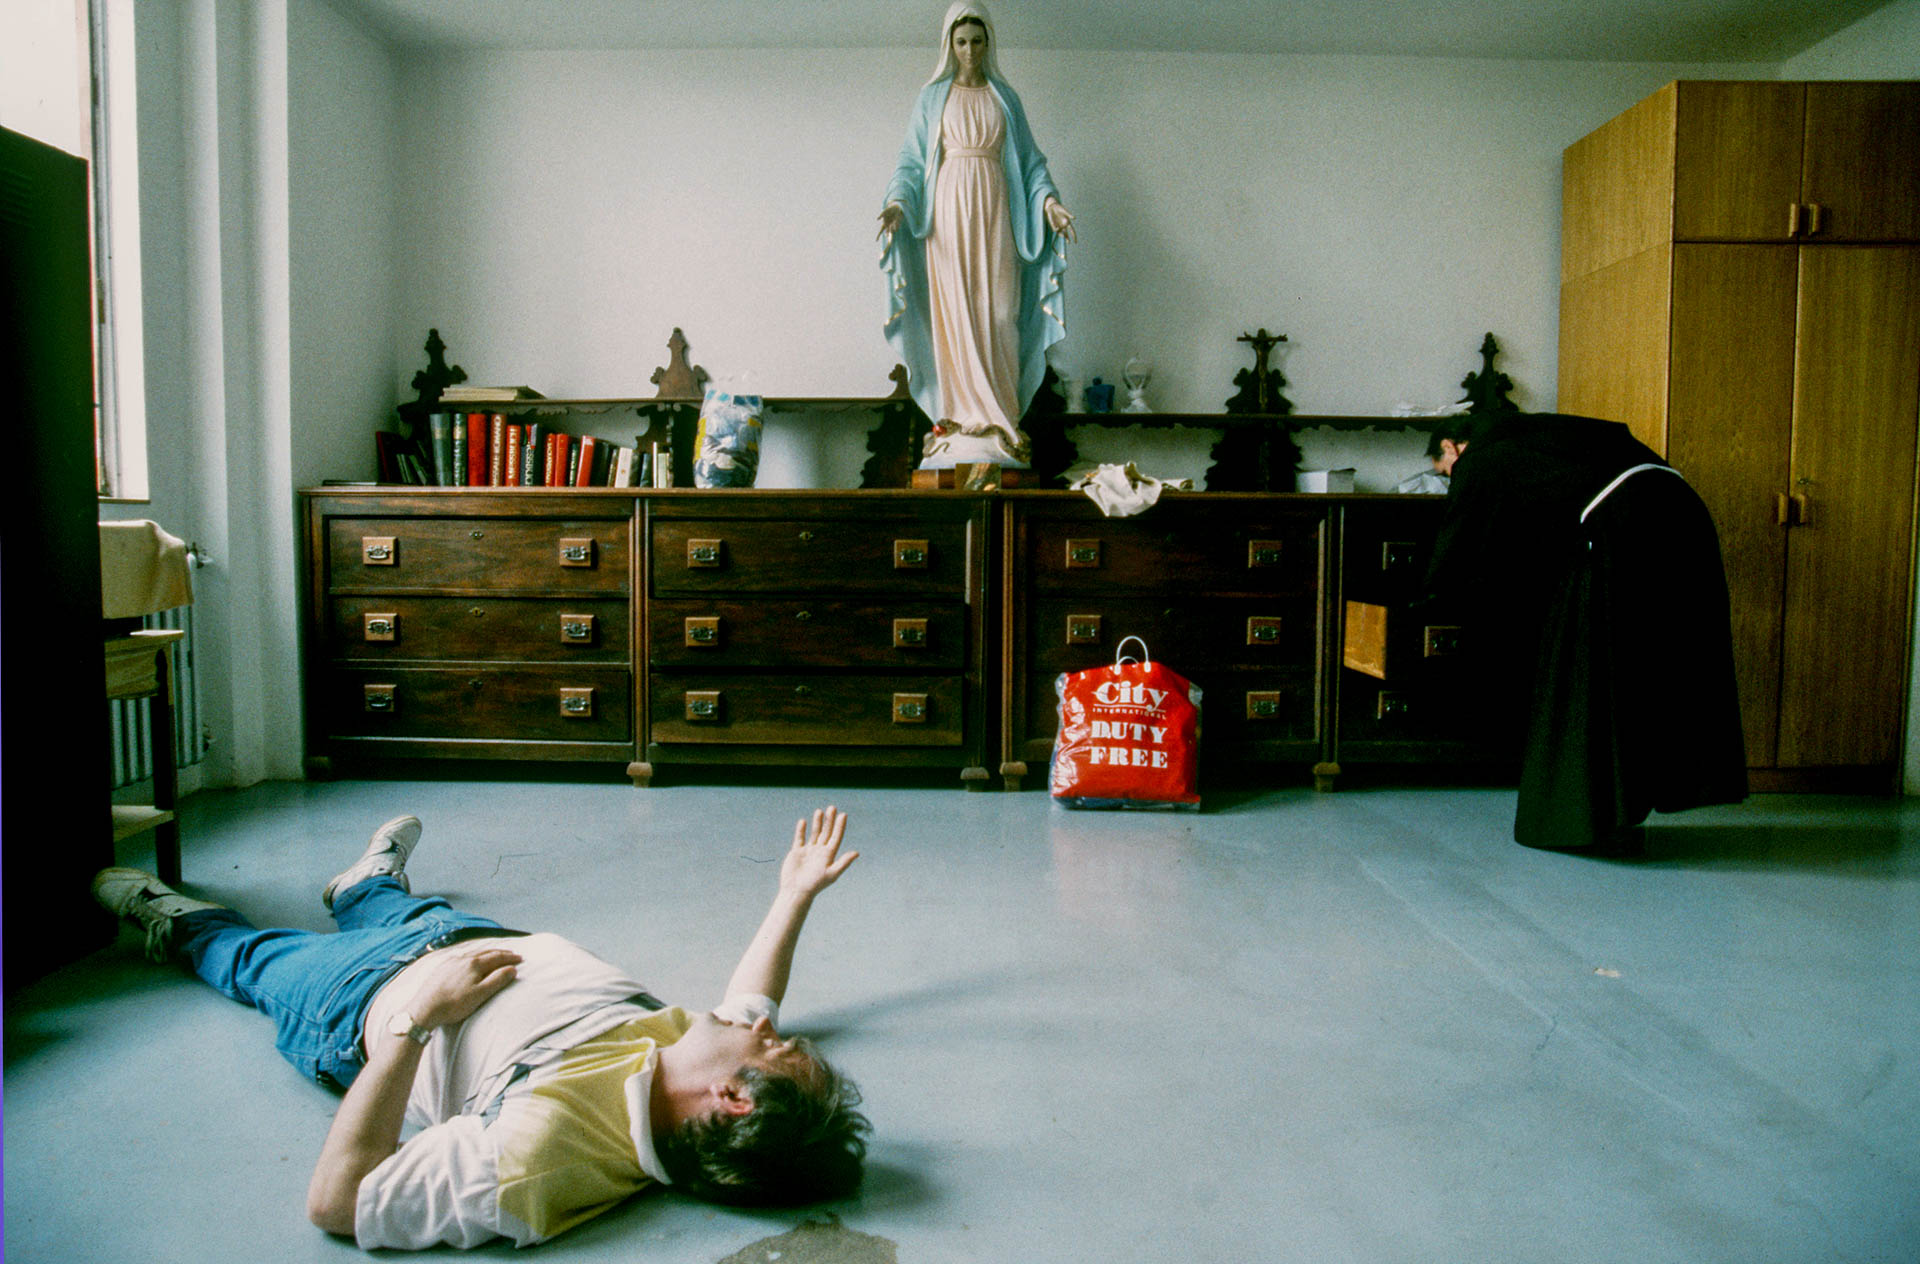  The miracle around the world: a believer just after an exorcism by Father Jozo in the Sacristy of the monastery.&nbsp; 